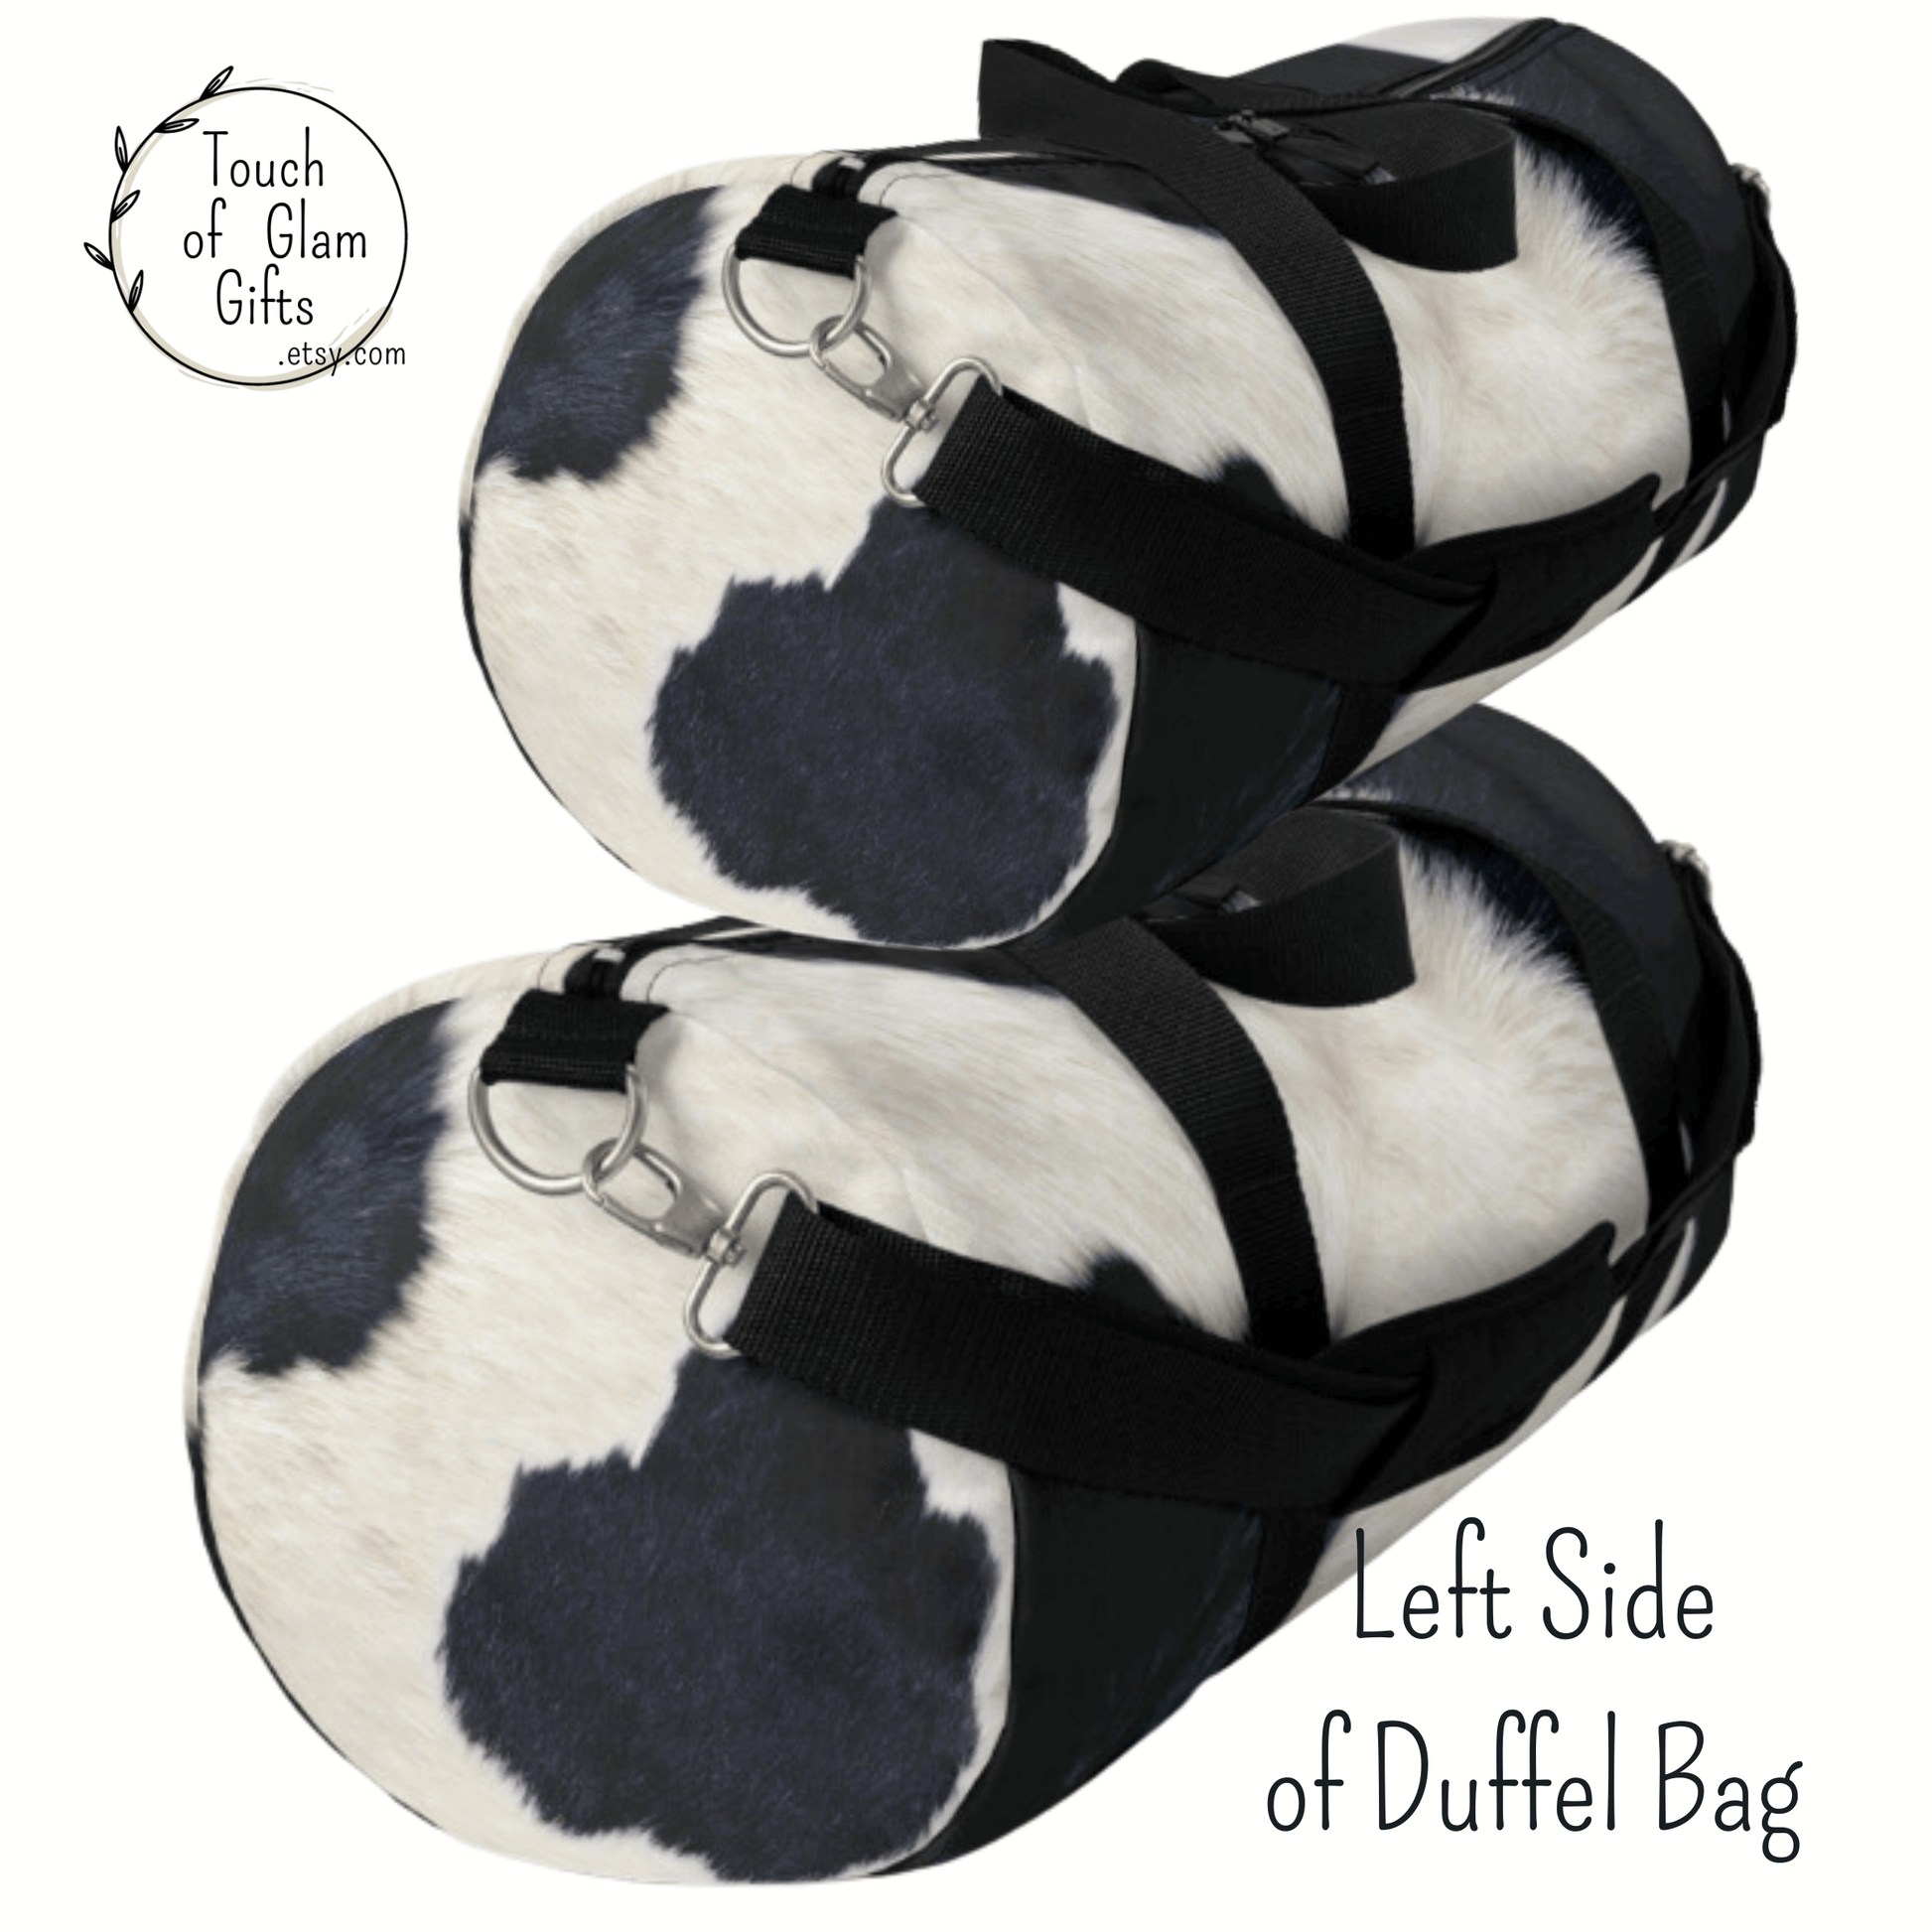 The second side of the cowprint duffel bag is no pocket and plain cow print on canvas duffel bag.